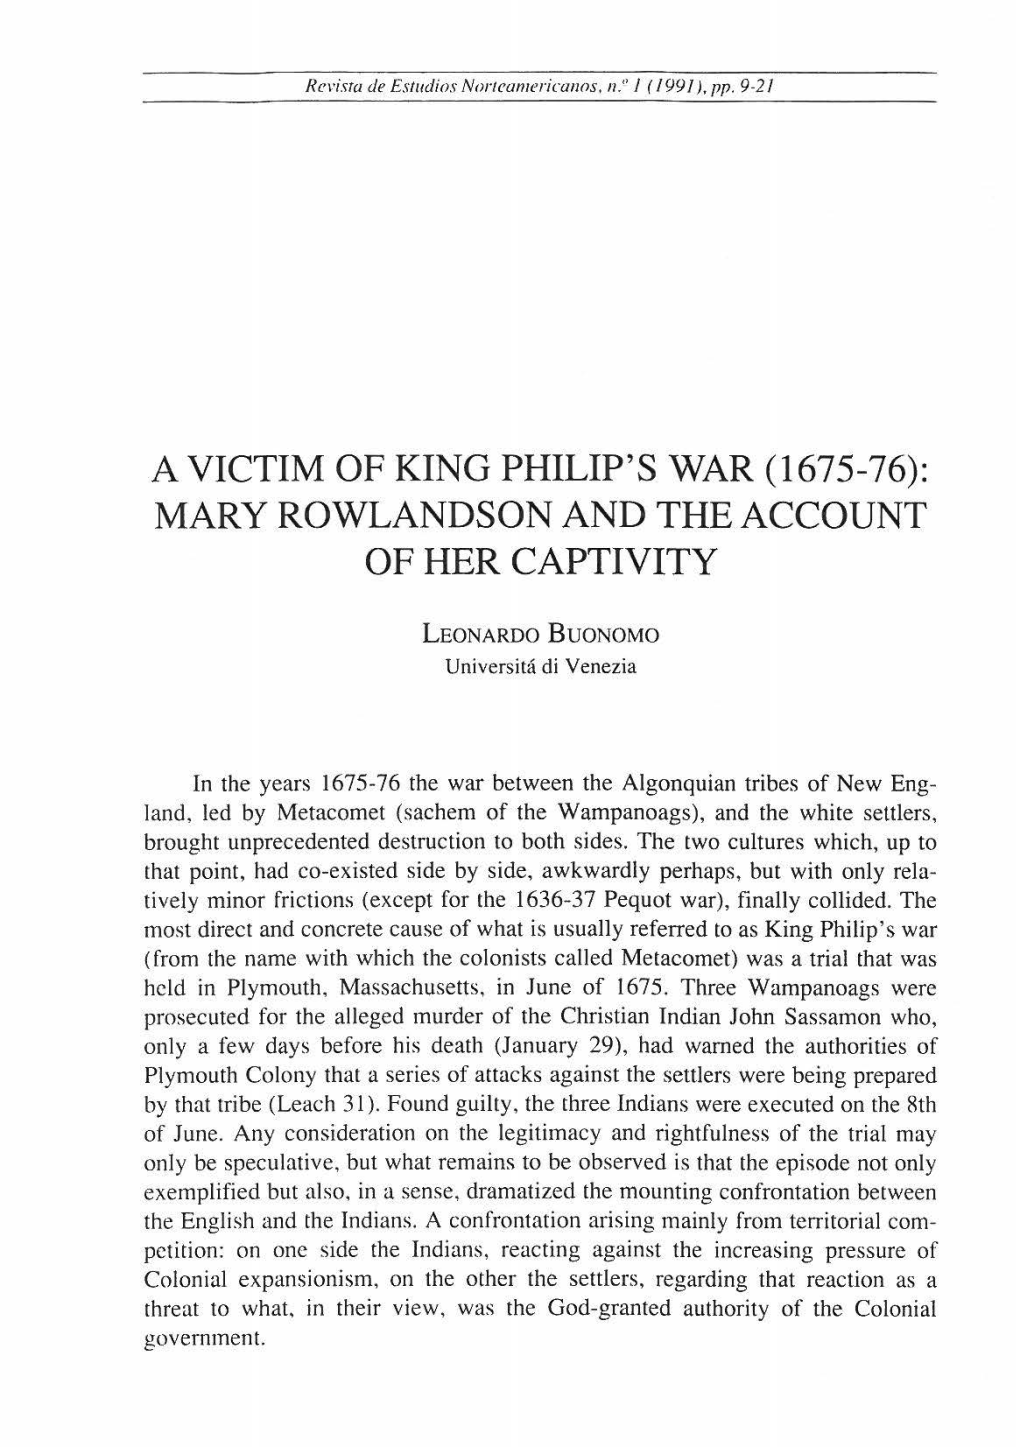 A Victim of King Philip's War (1675-76): Mary Rowlandson and the Account of Her Captivity